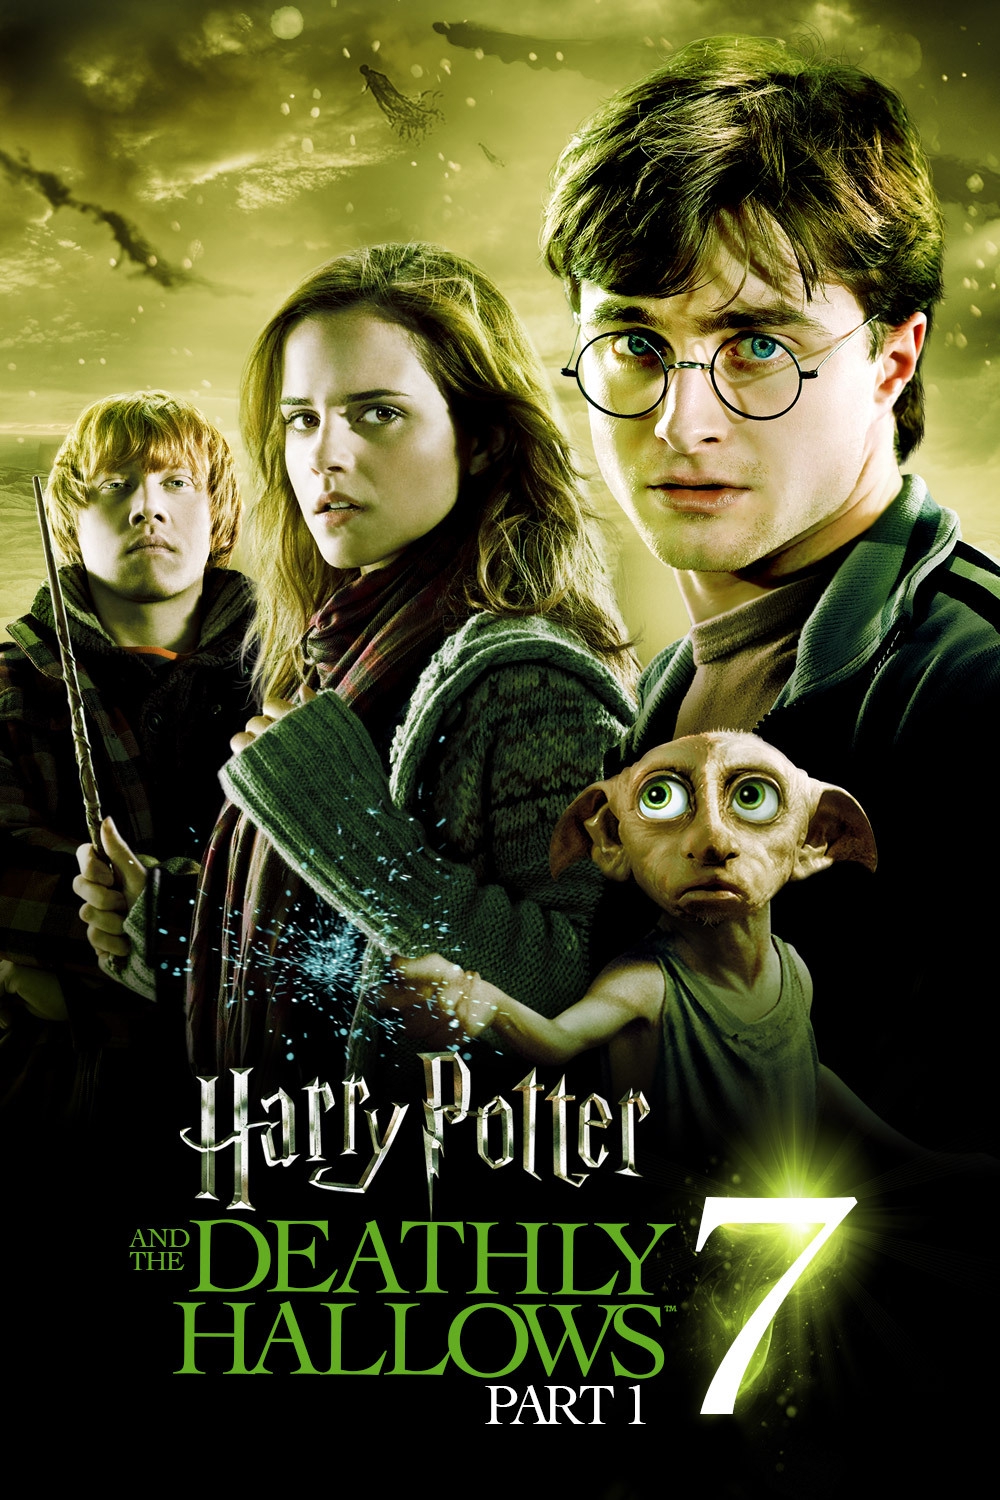 watch harry potter deathly hallows part 1 online free